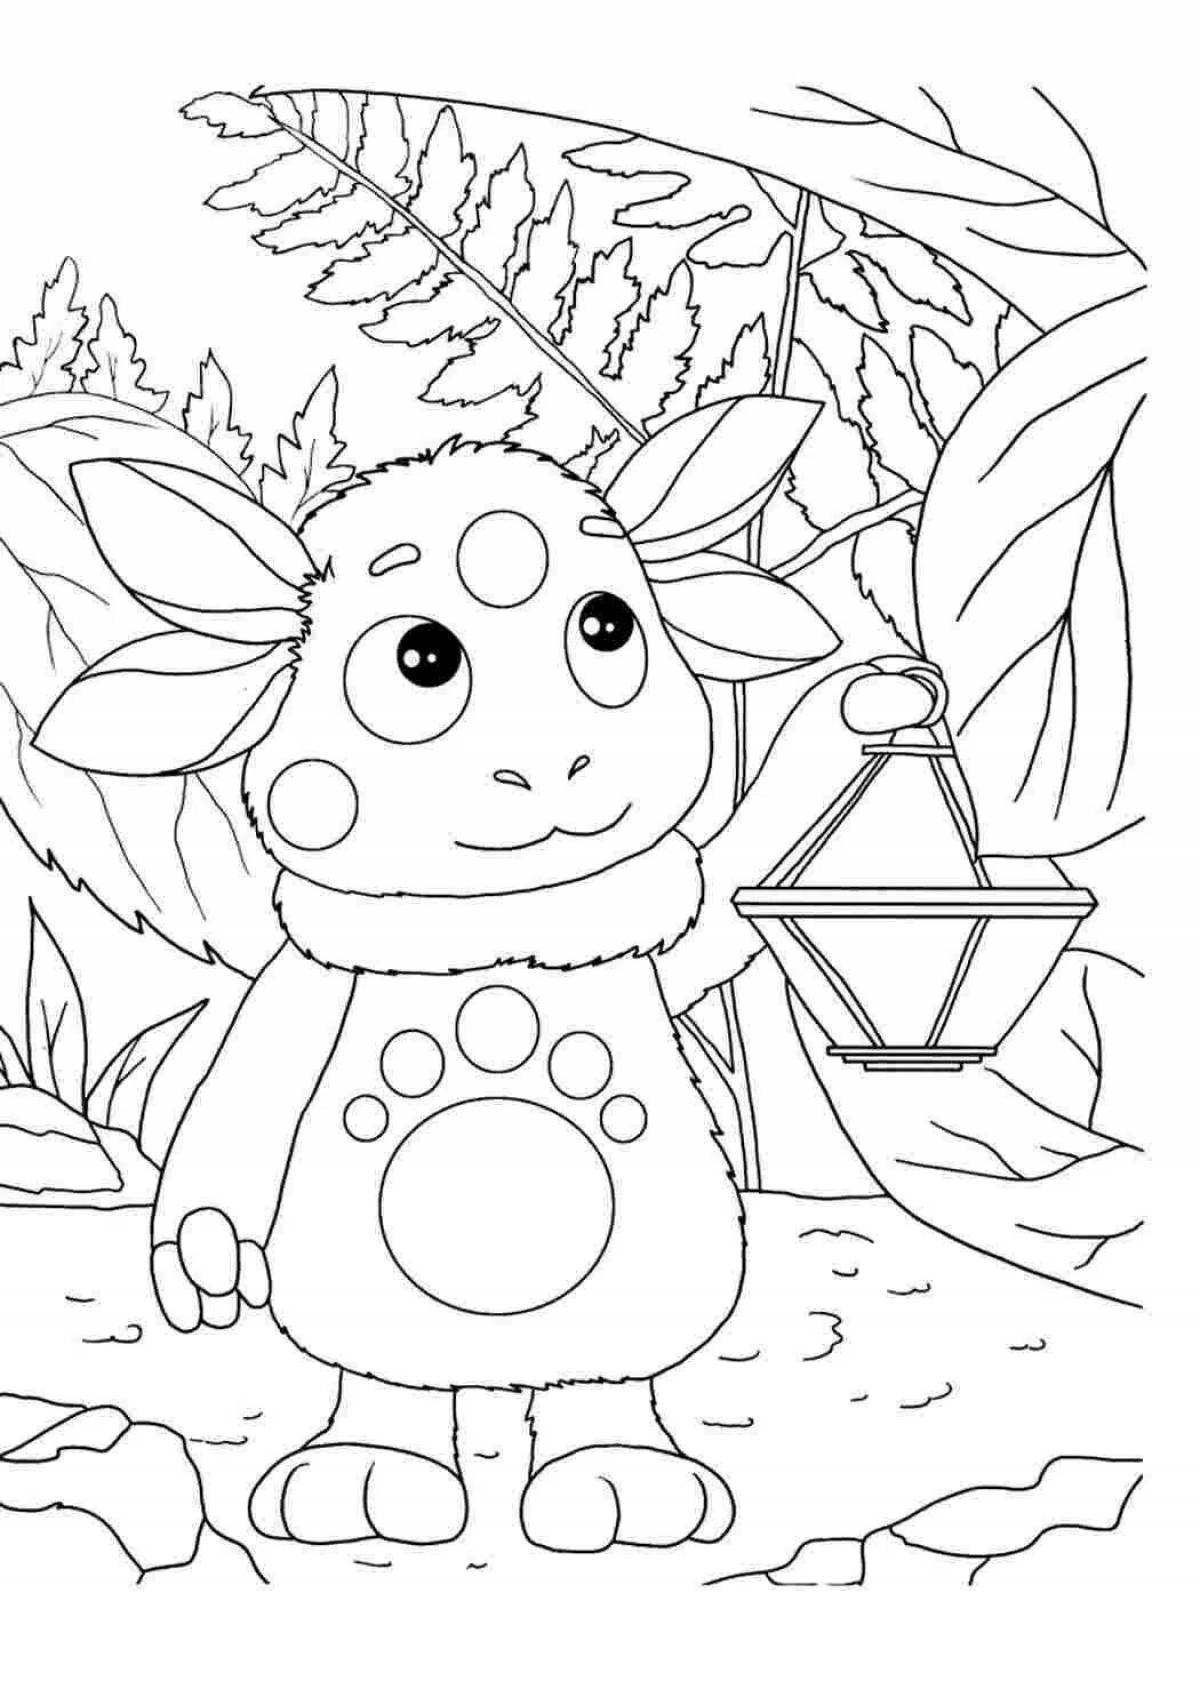 Creative cartoon coloring book for 4-5 year olds